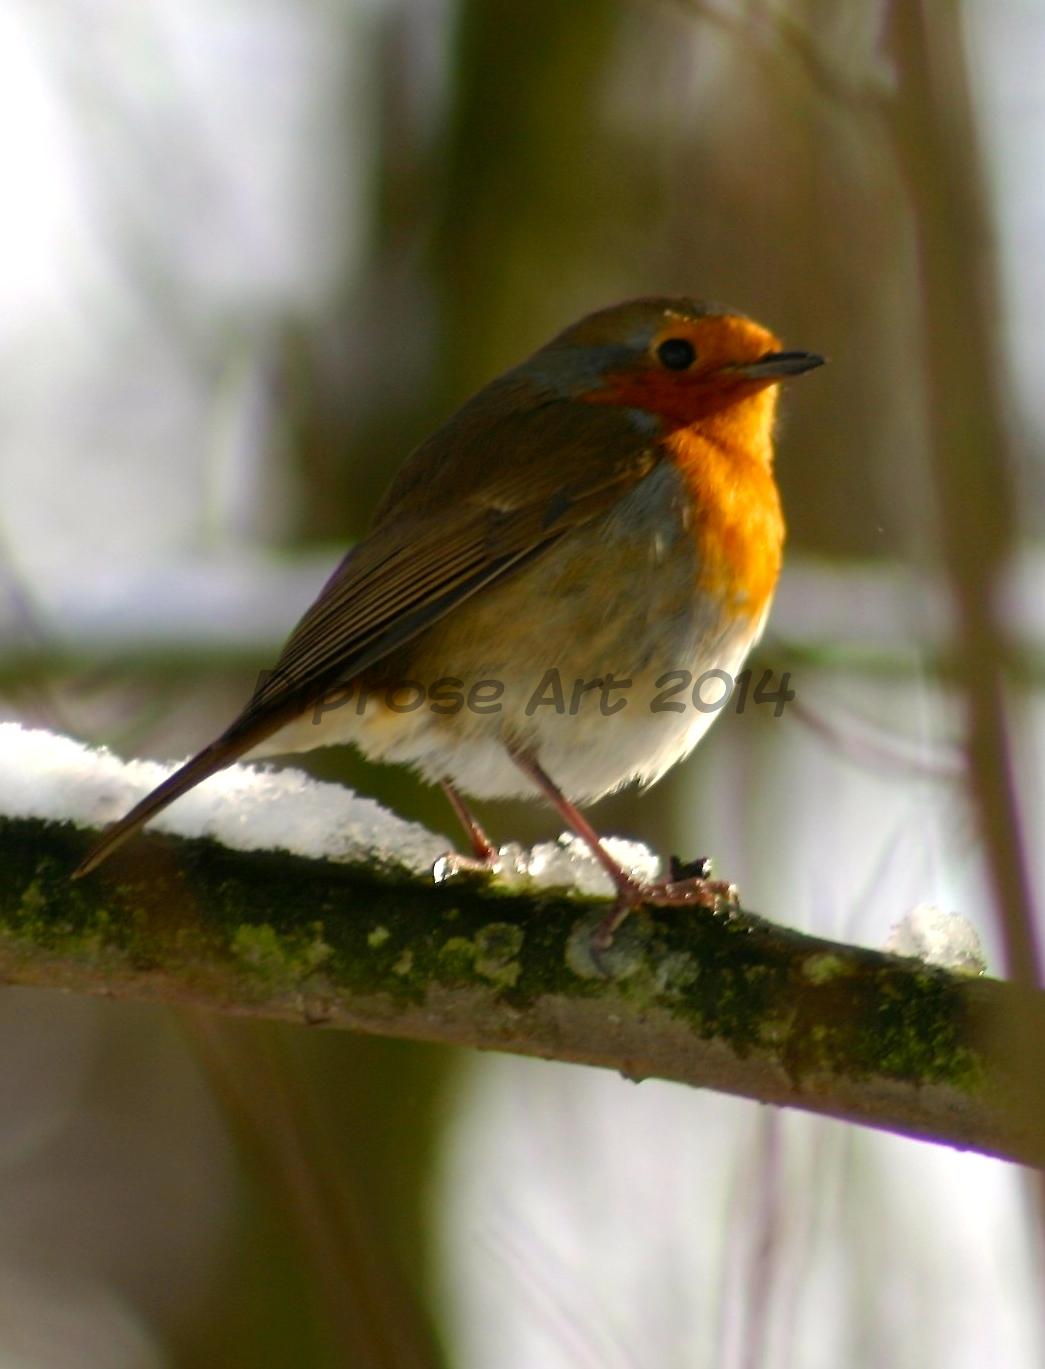 This is actually a different Robin - not my stalker